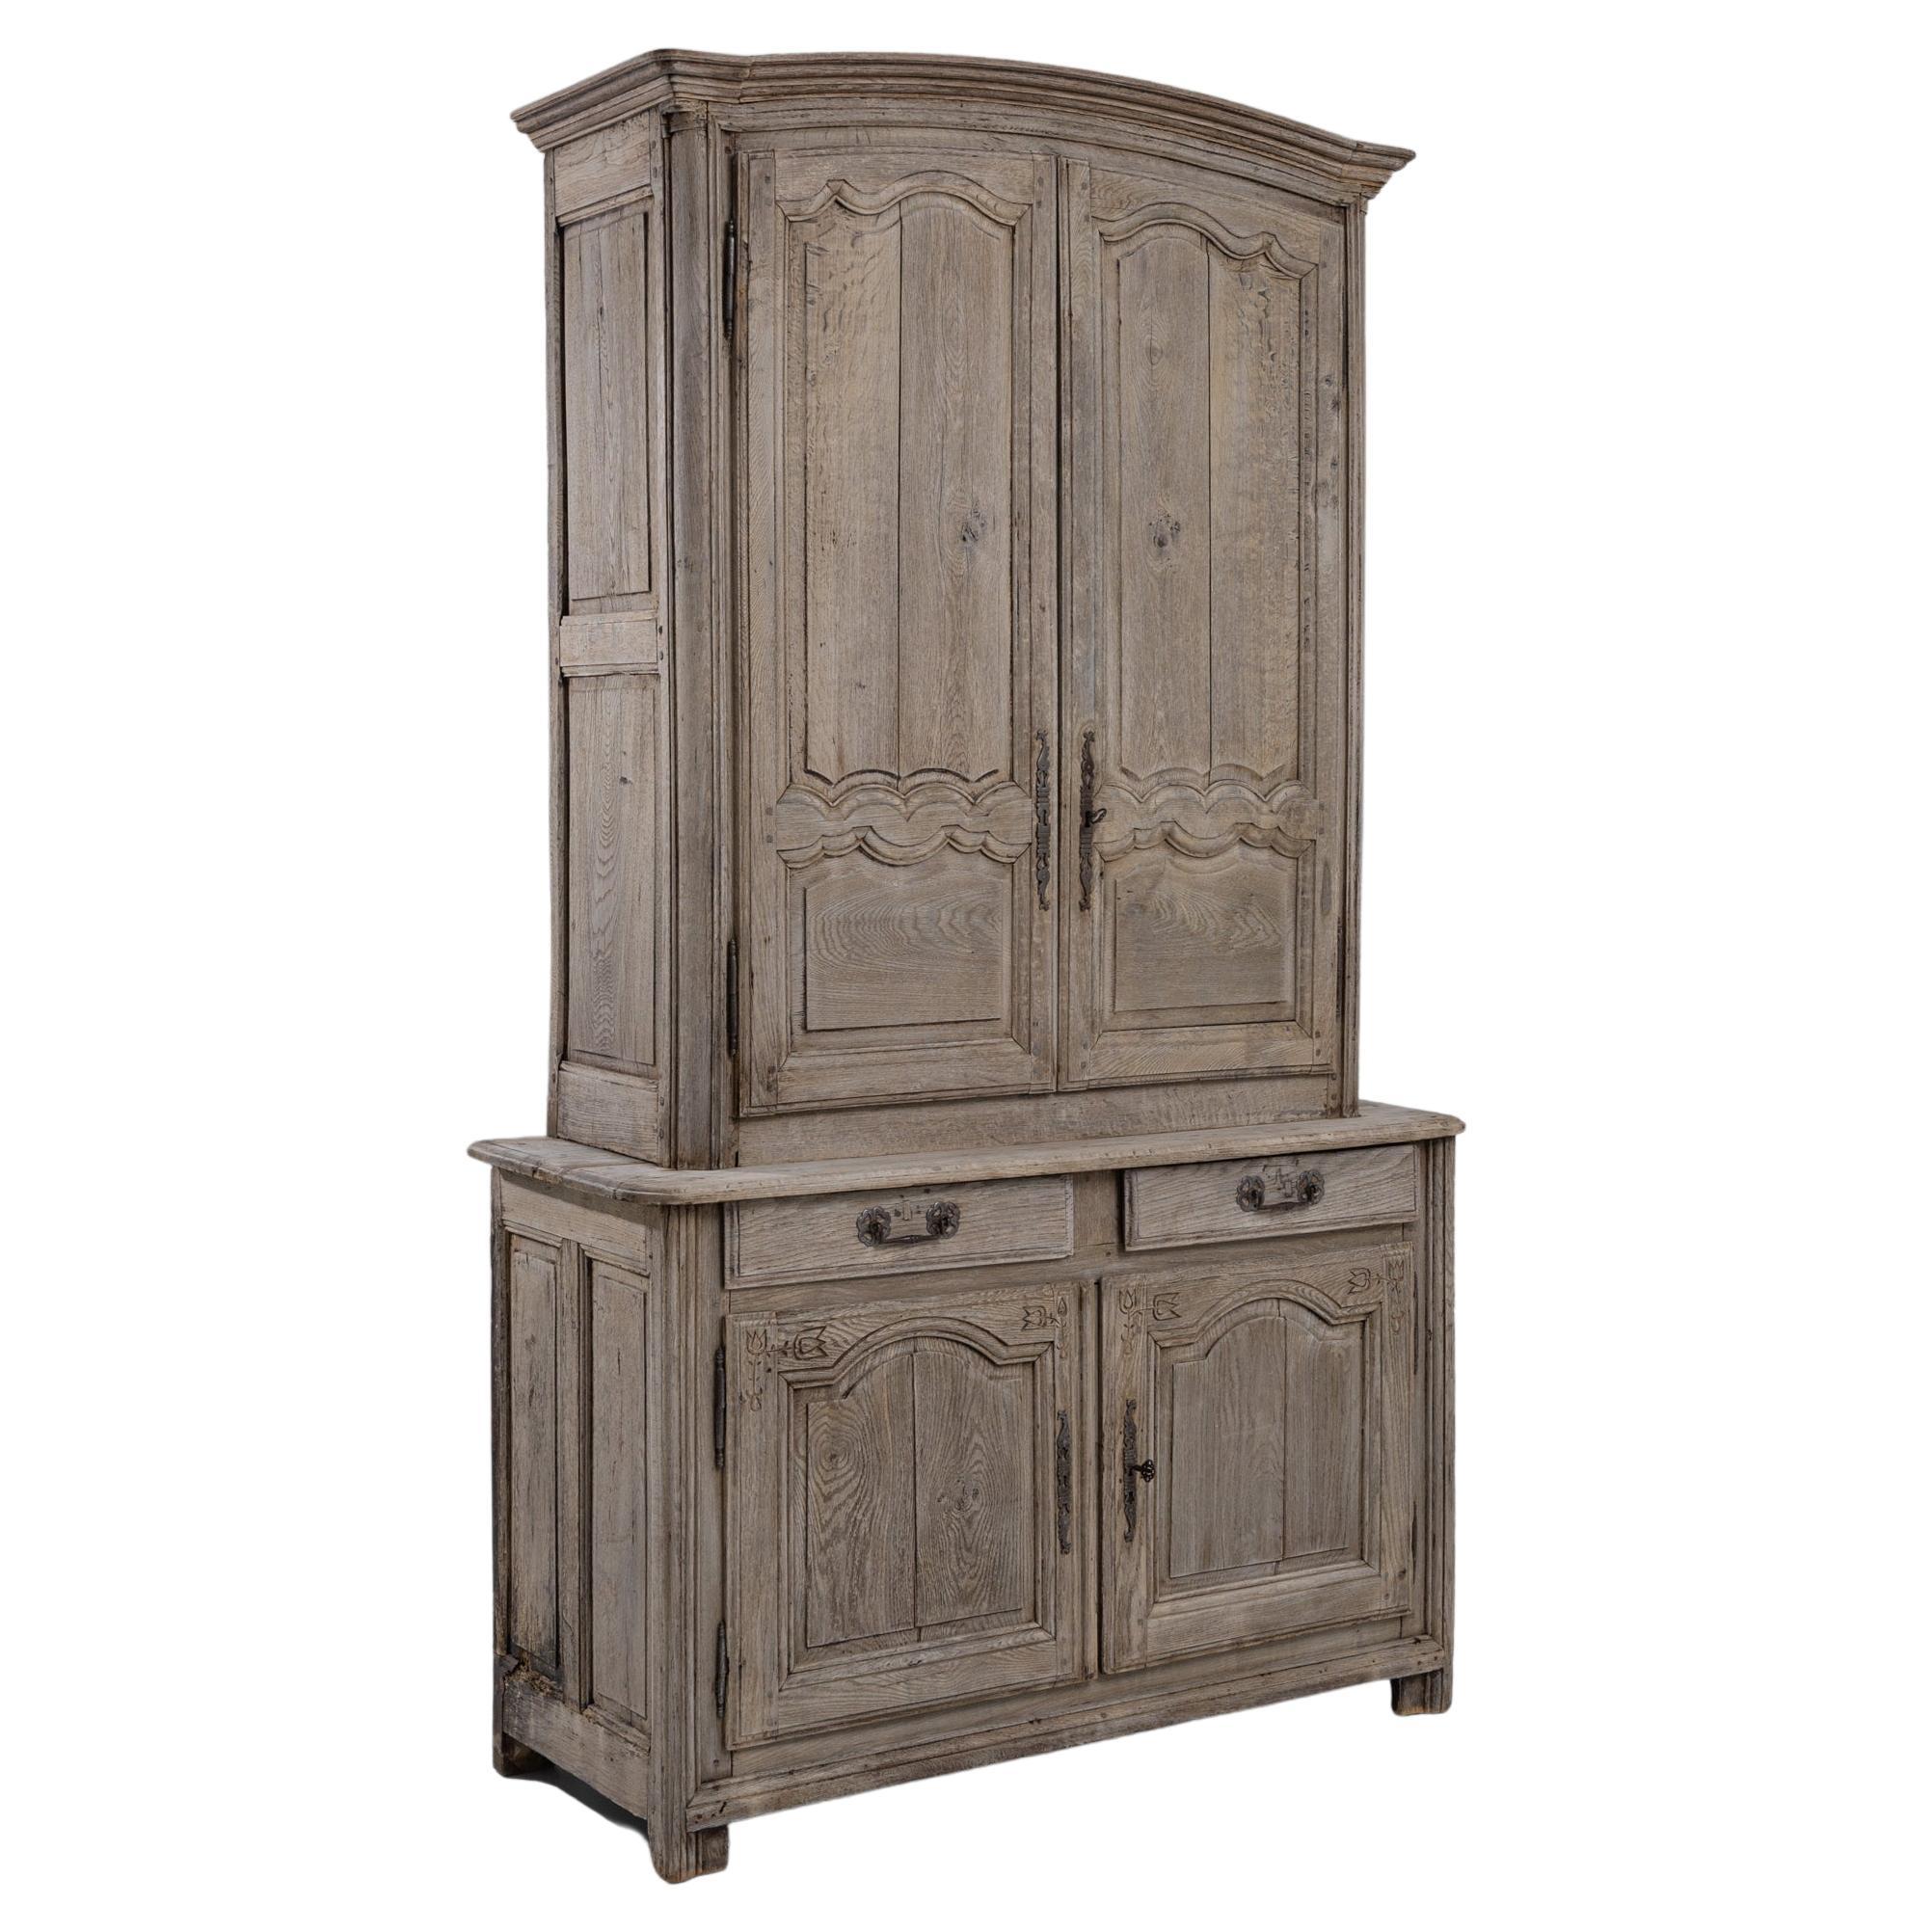 19th Century French Wooden Cabinet 